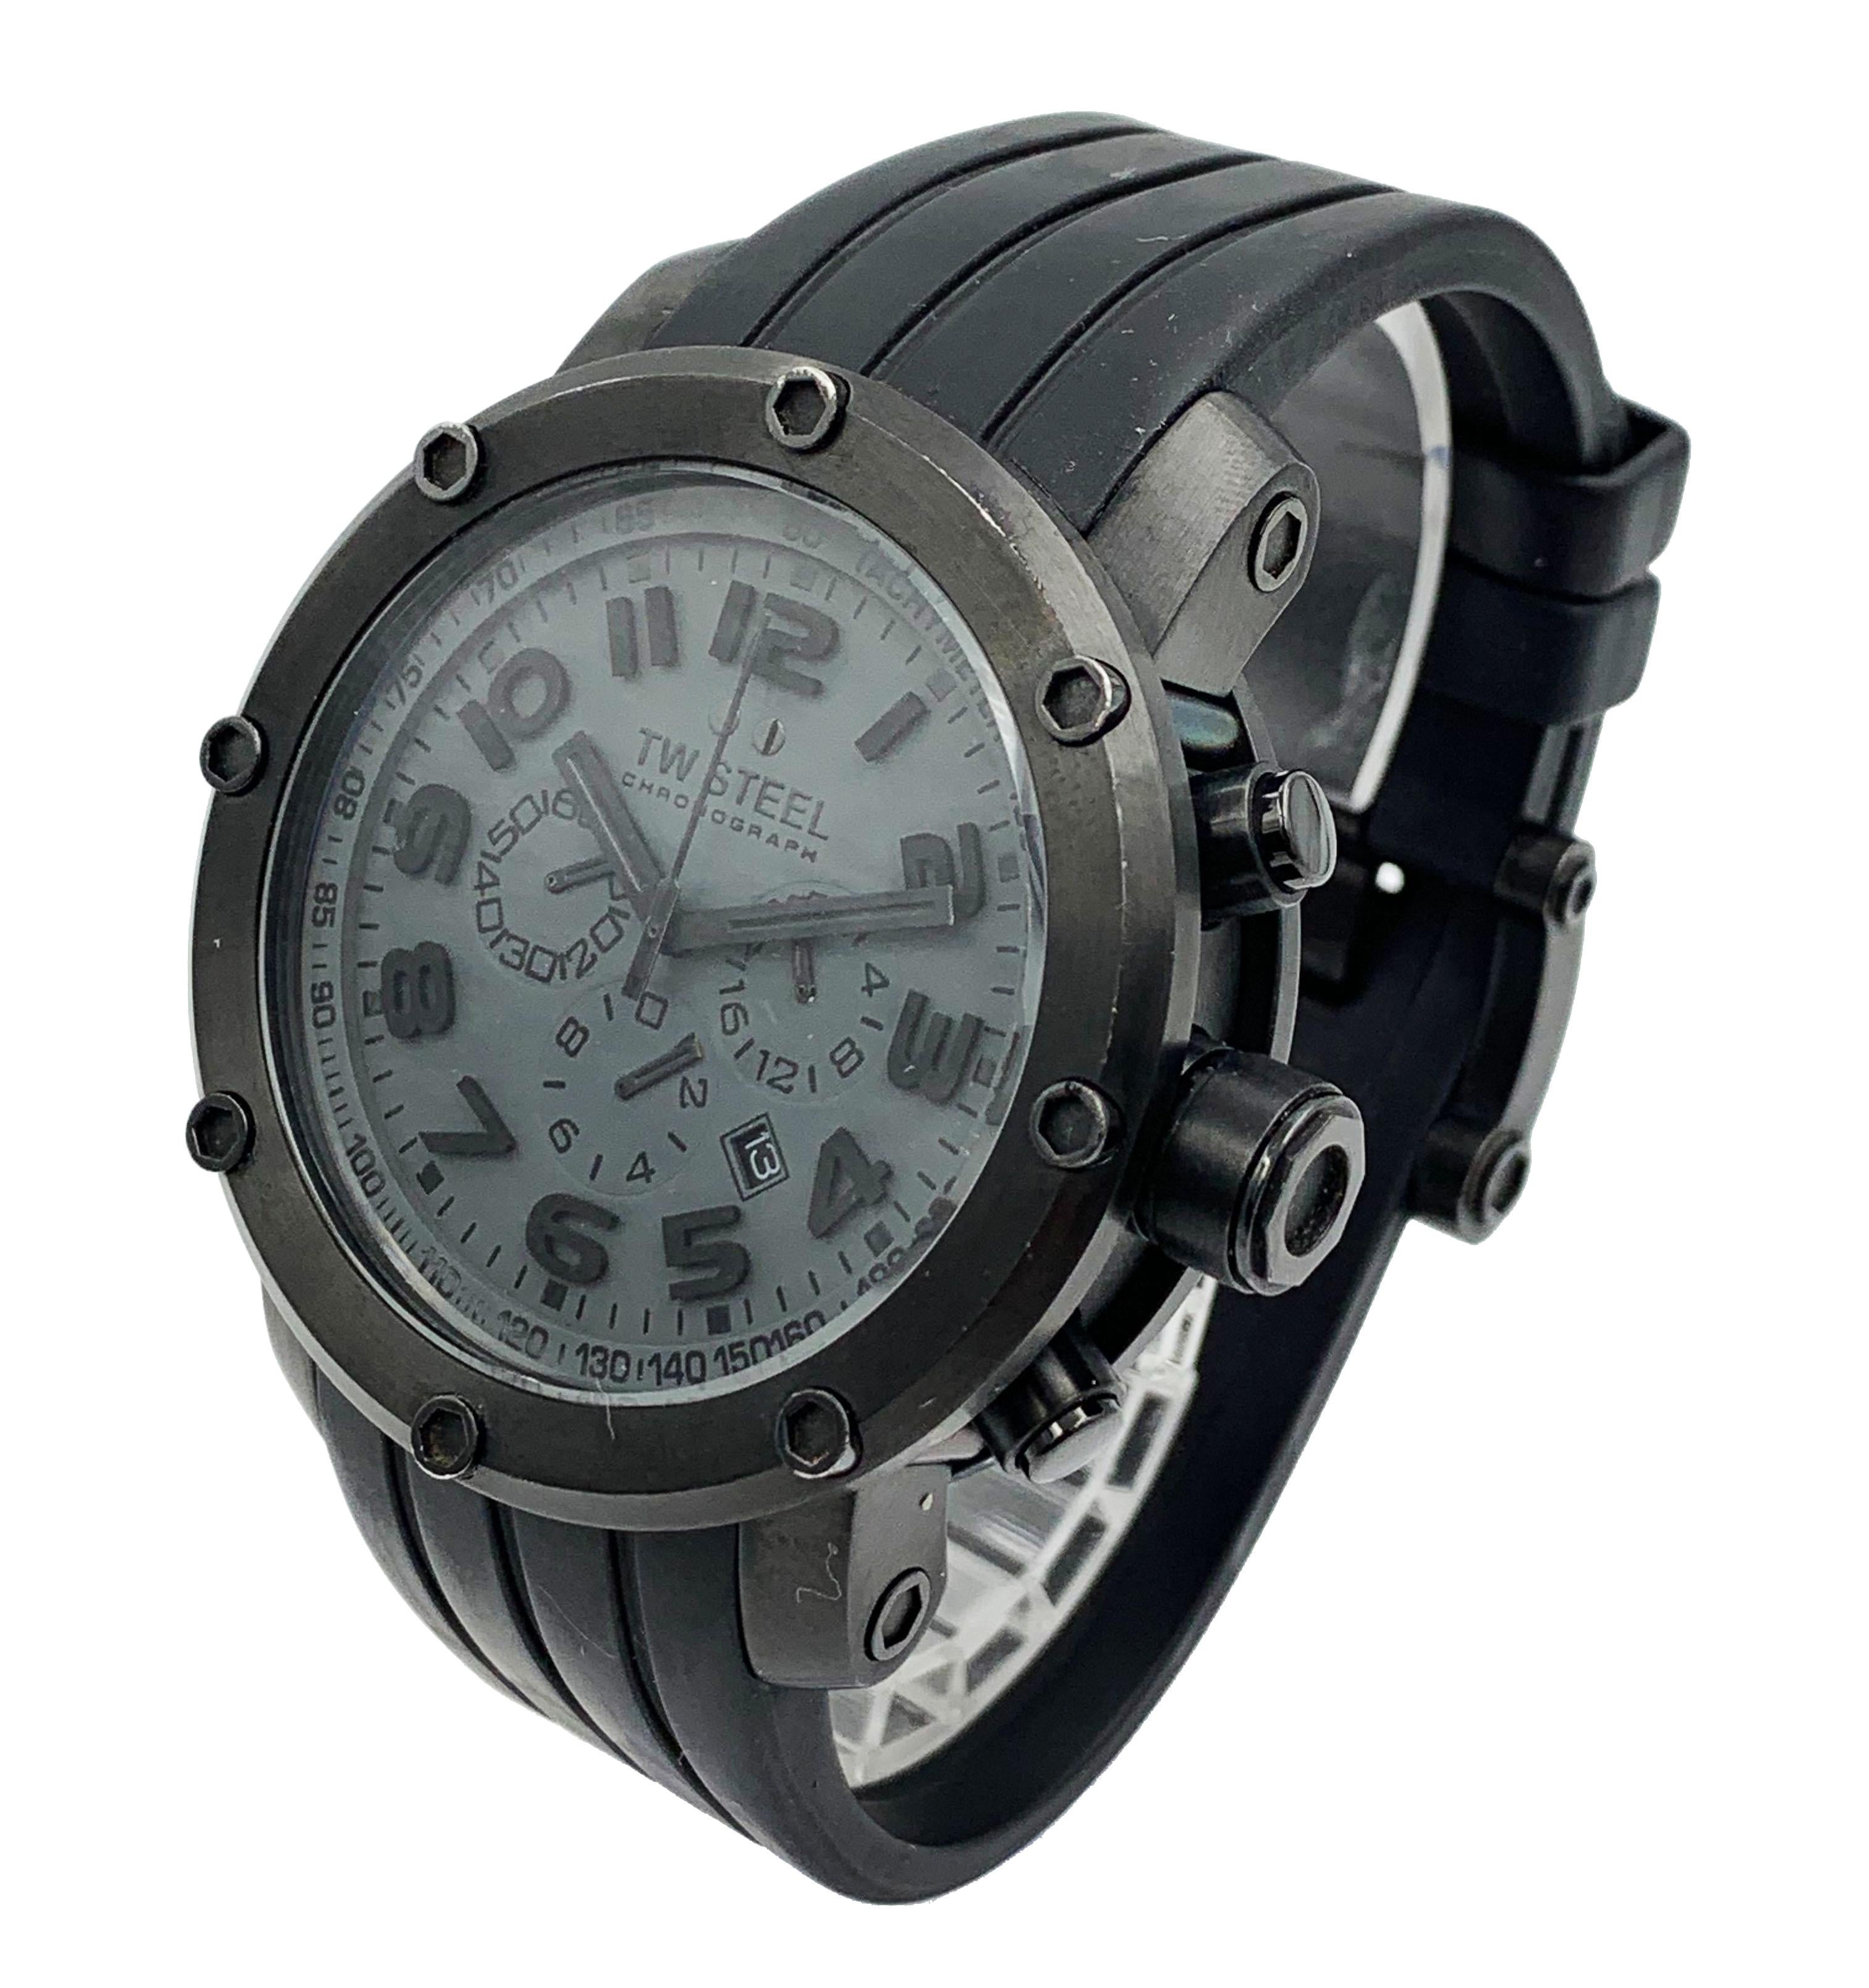 Watch have visible signs of wear.
visible scratches, scuff and dings on case.
Comes with original box and papers.
TW Steel Black PVD Plated Stainless Steel Chronograph Mens Quartz Watch TW129
48 millimeters case size
Case Diameter	48mm